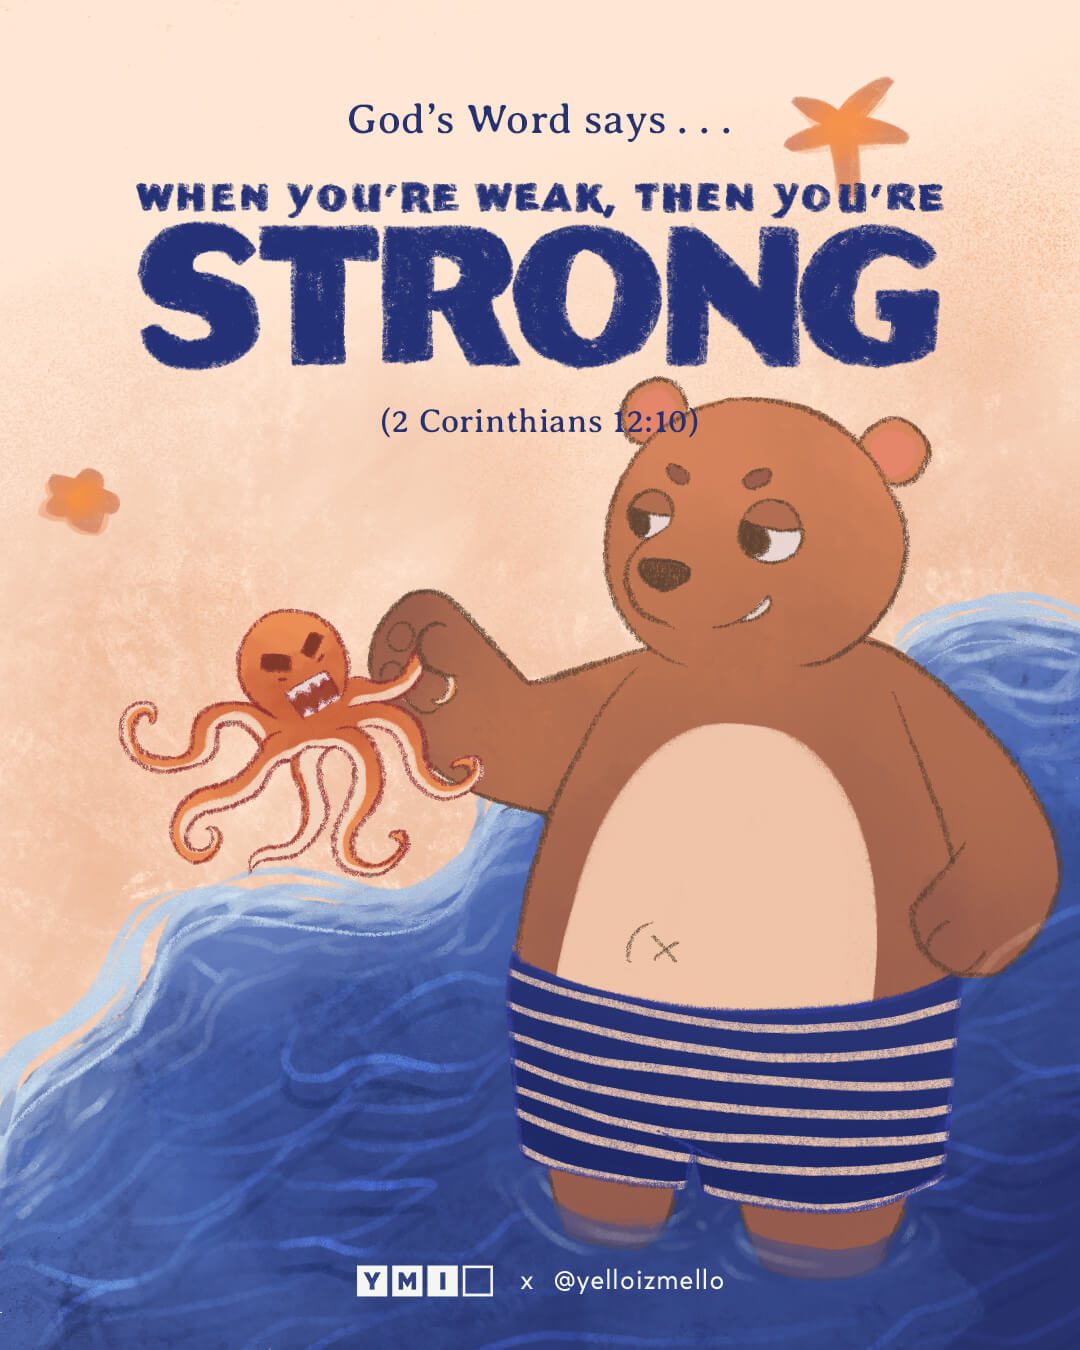 The bear is catching the octopus